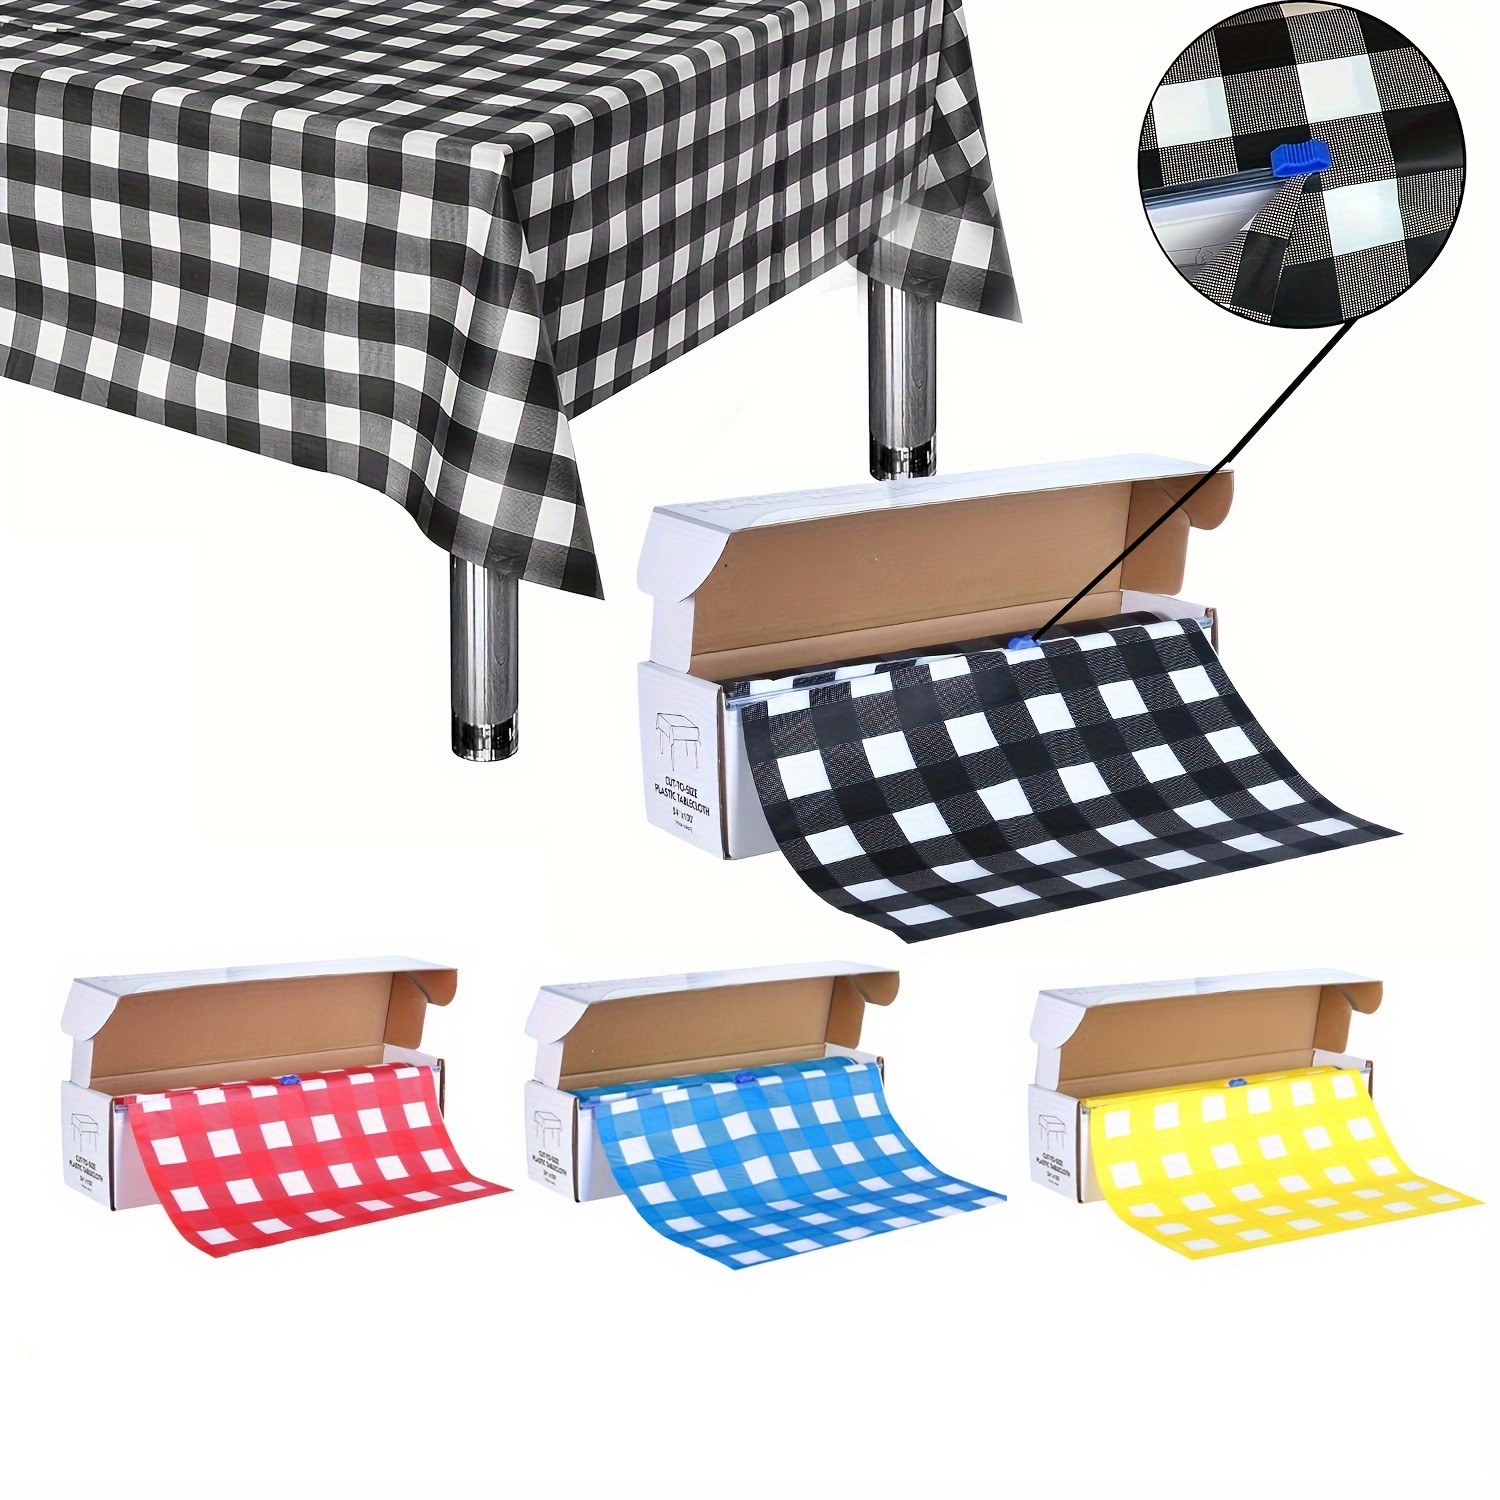 1 Roll/20pcs Disposable Tablecloth Plastic Thin Film Table Covers